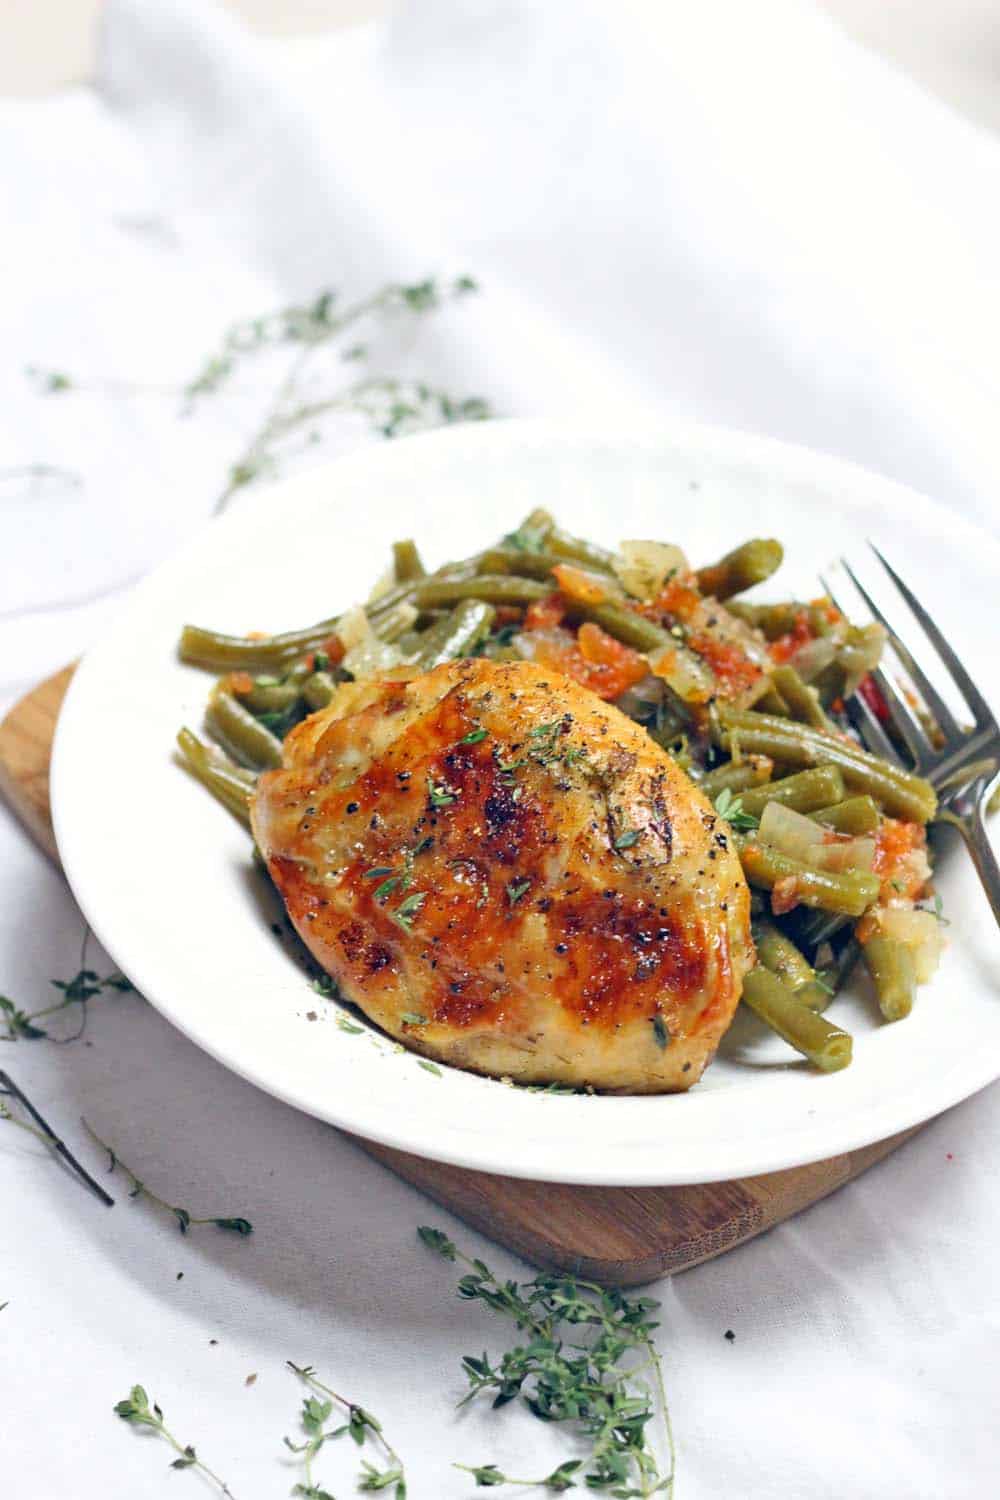 Slow Cooker Greek-Style Green Beans and Chicken thighs is the ULTIMATE one-pot meal: everything cooks in your crockpot at once! Plus, it's cheap, whole30/paleo, low carb, and healthy.